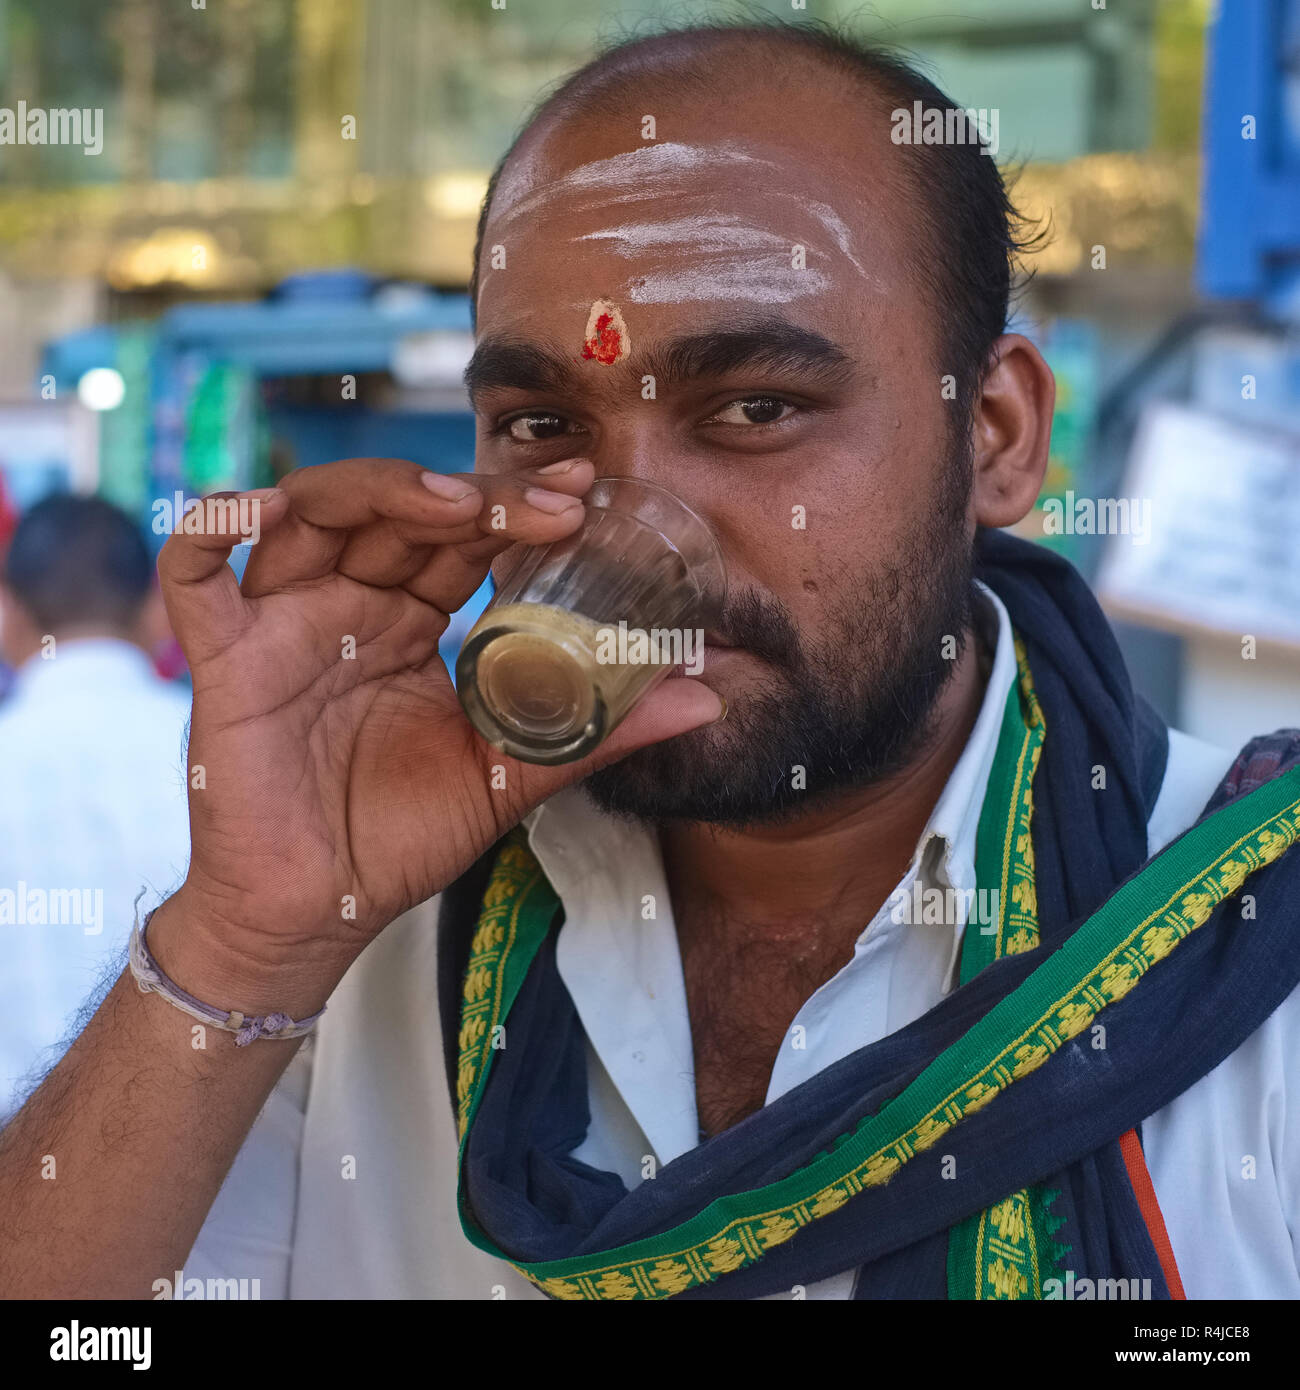 A South Indian man drinking tea at a roadside tea stall in Mumbai, India, drinking from a typical small Indian tea glass Stock Photo